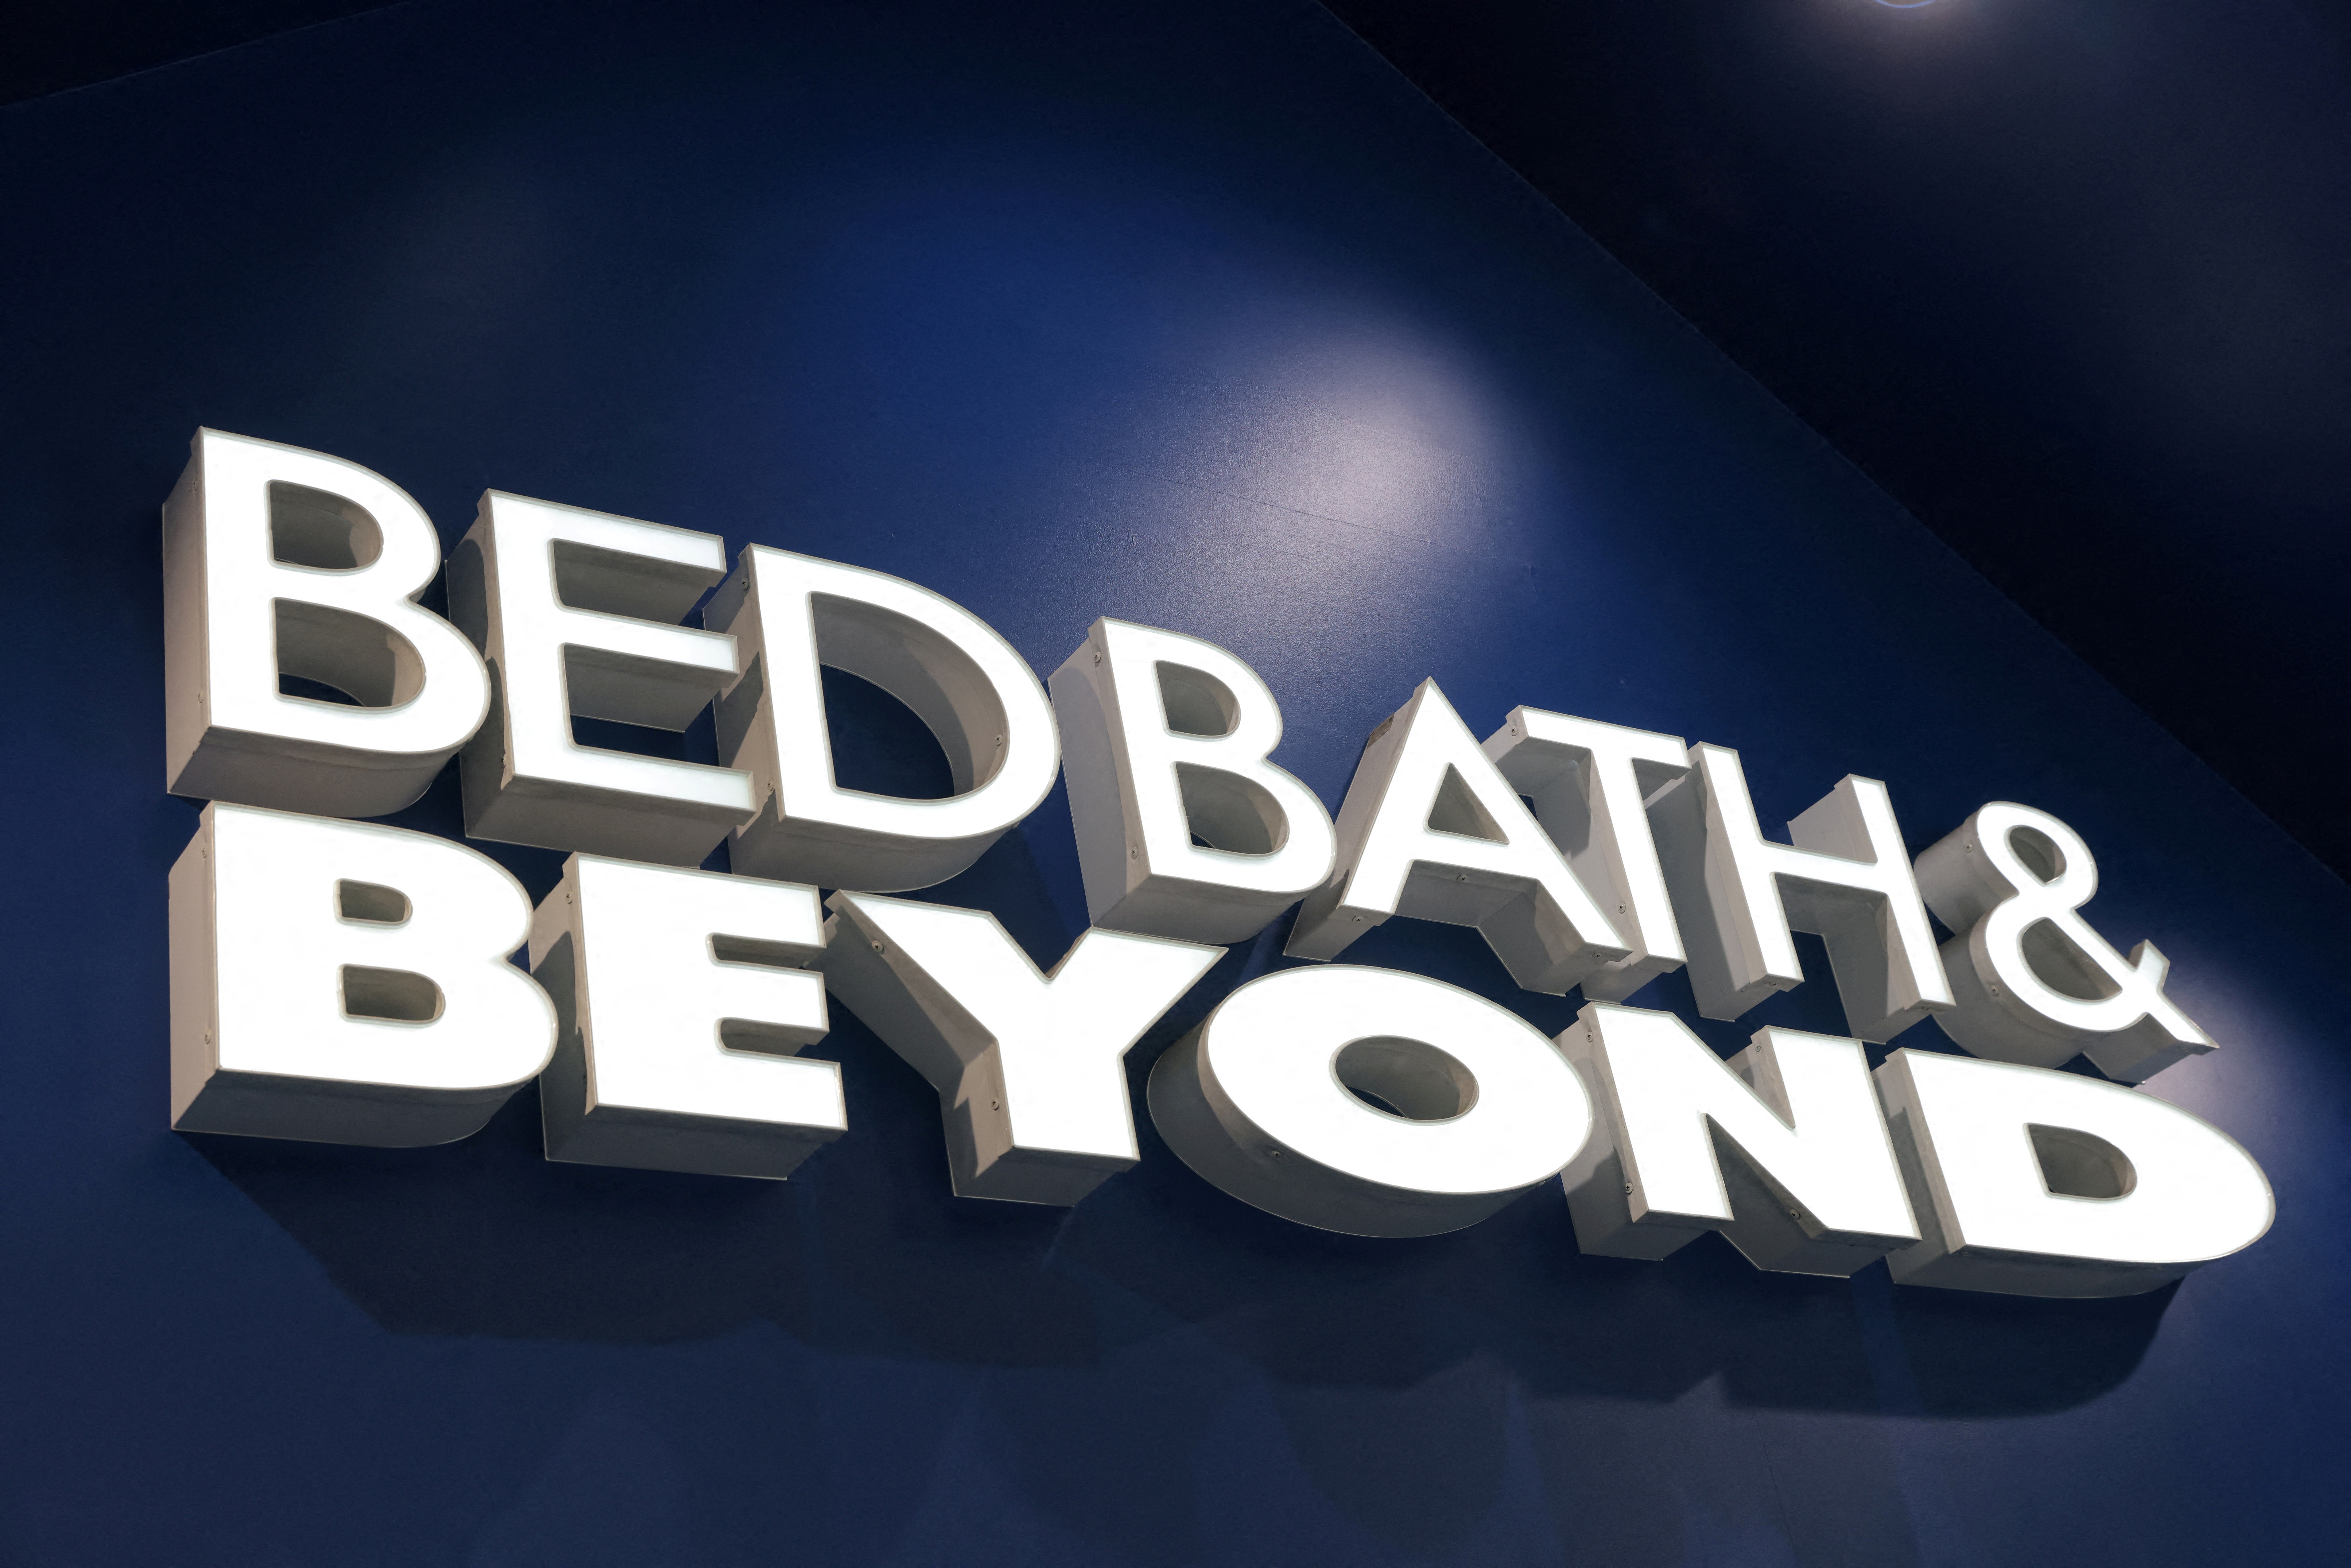 Signage on display at a Bed Bath & Beyond store in Manhattan, New York City